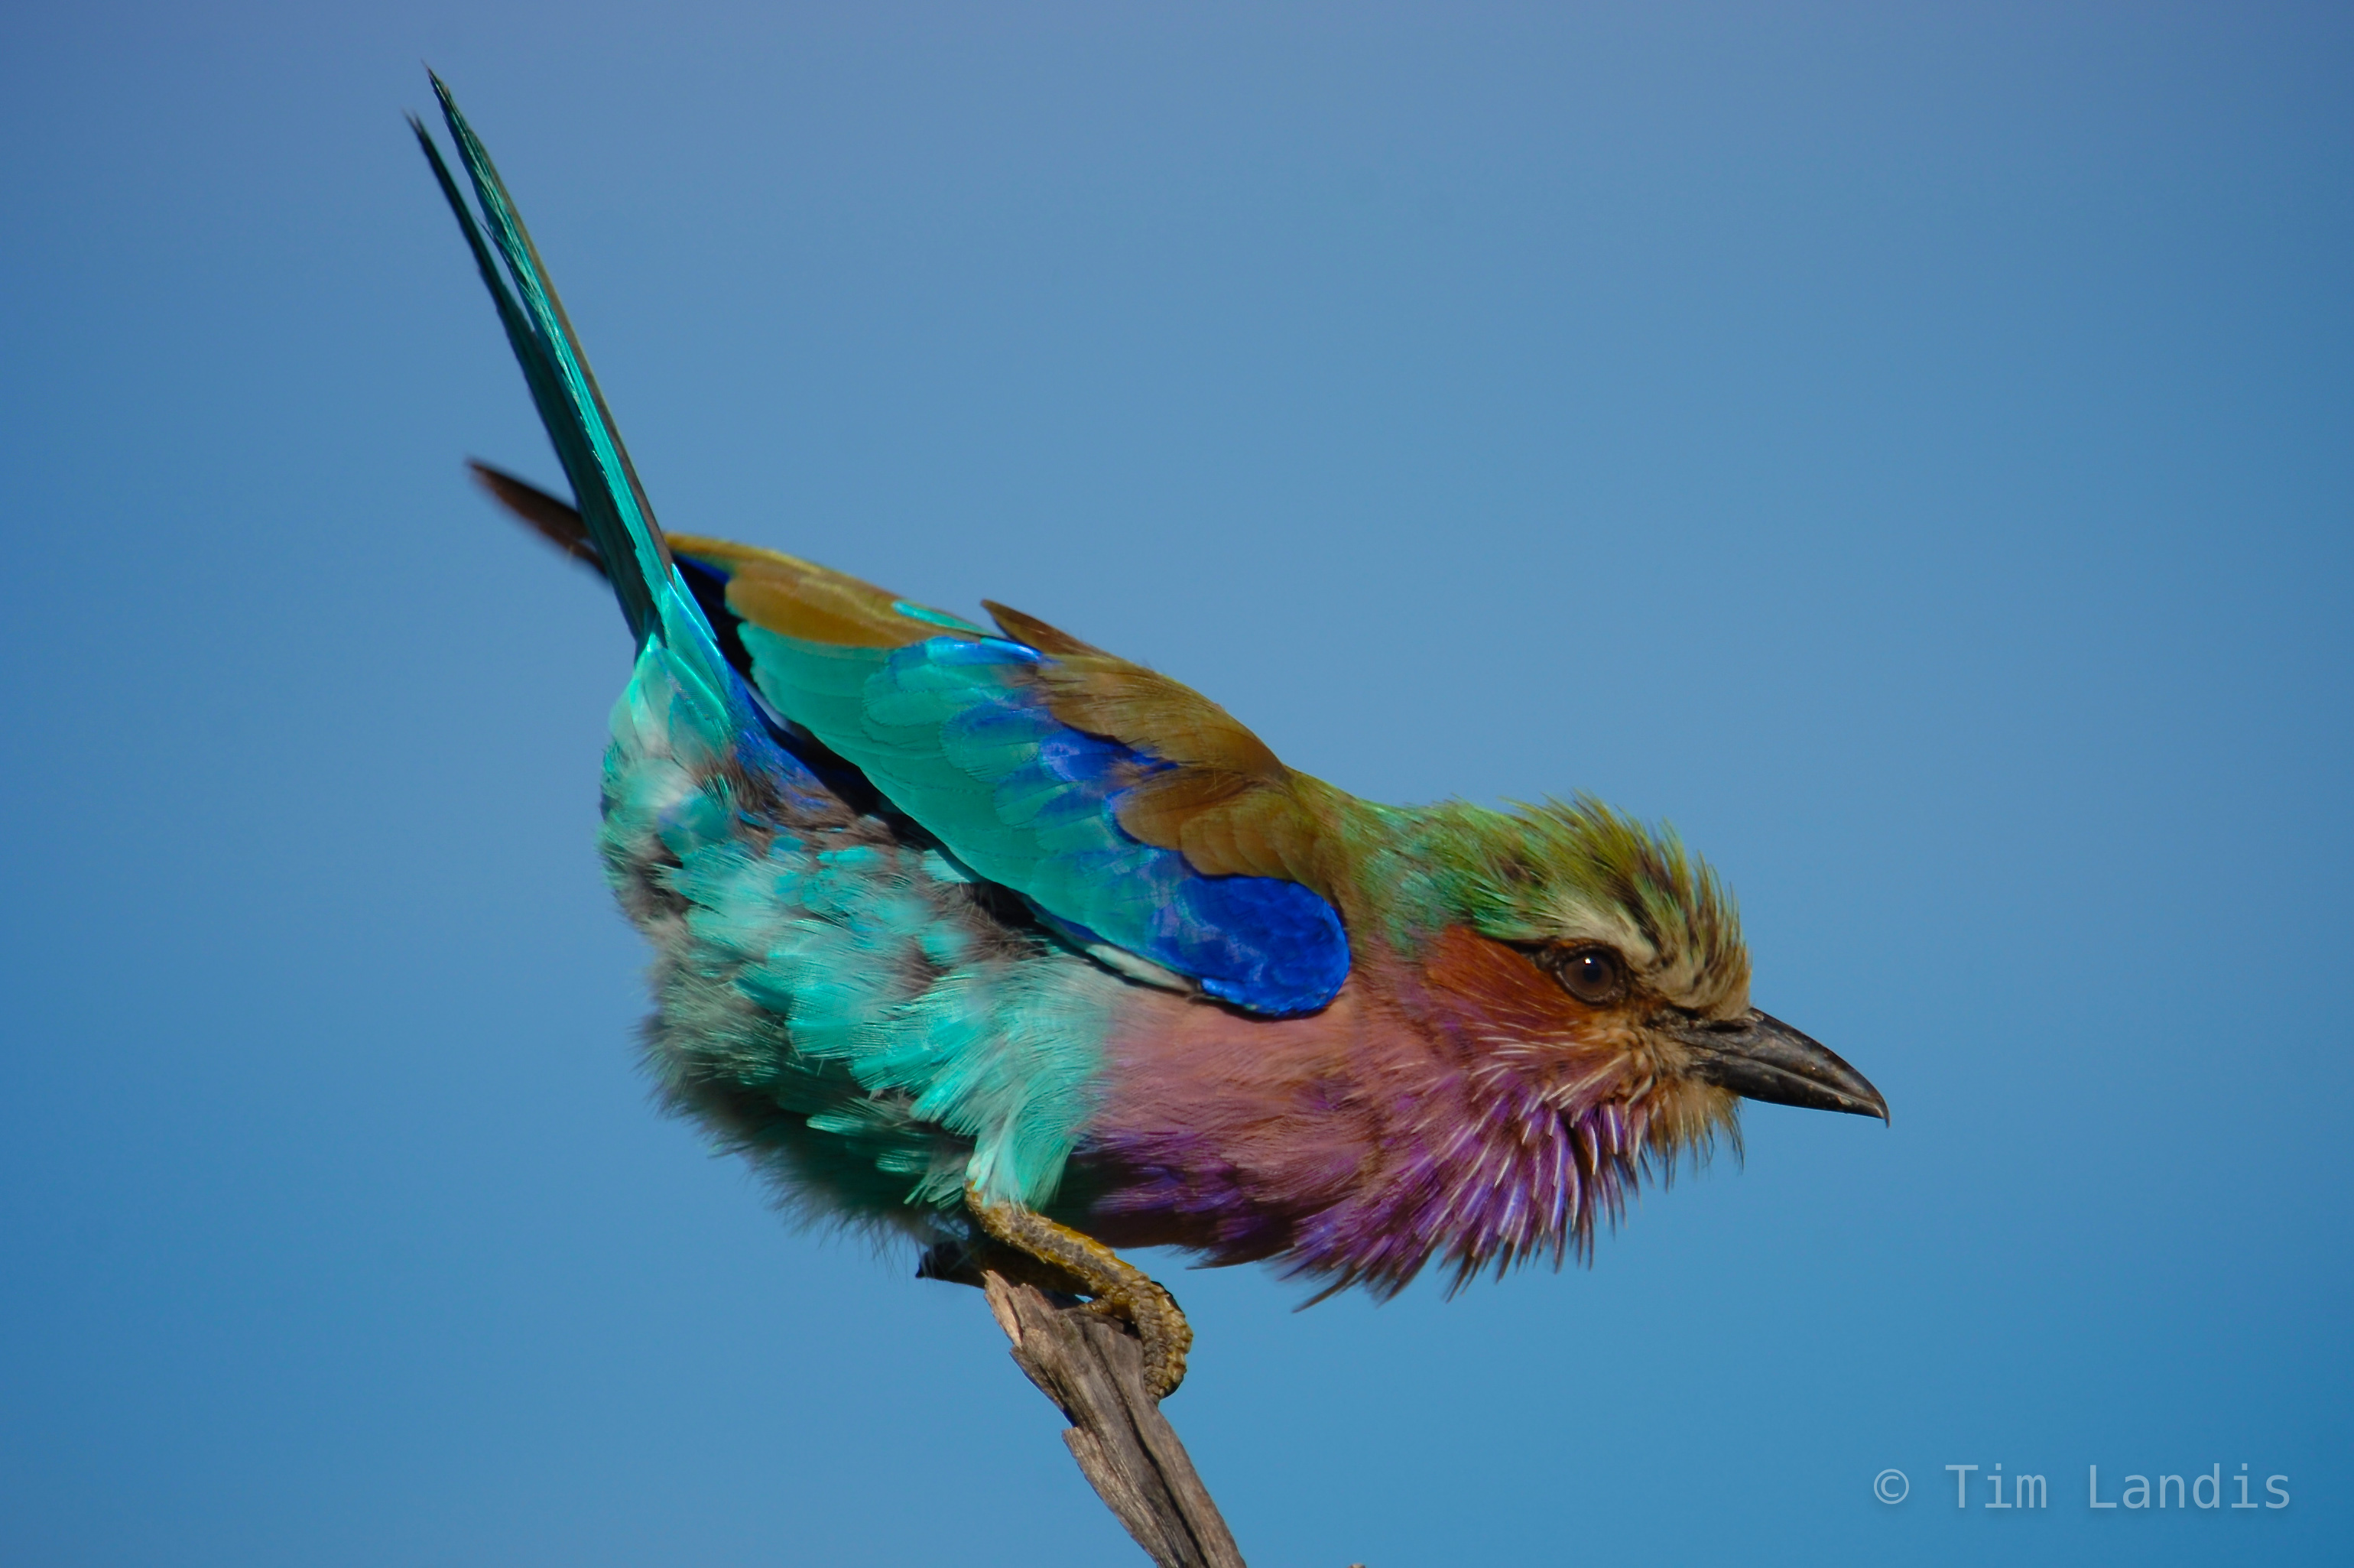 a friendly roller fluffs and bows, posing roller,